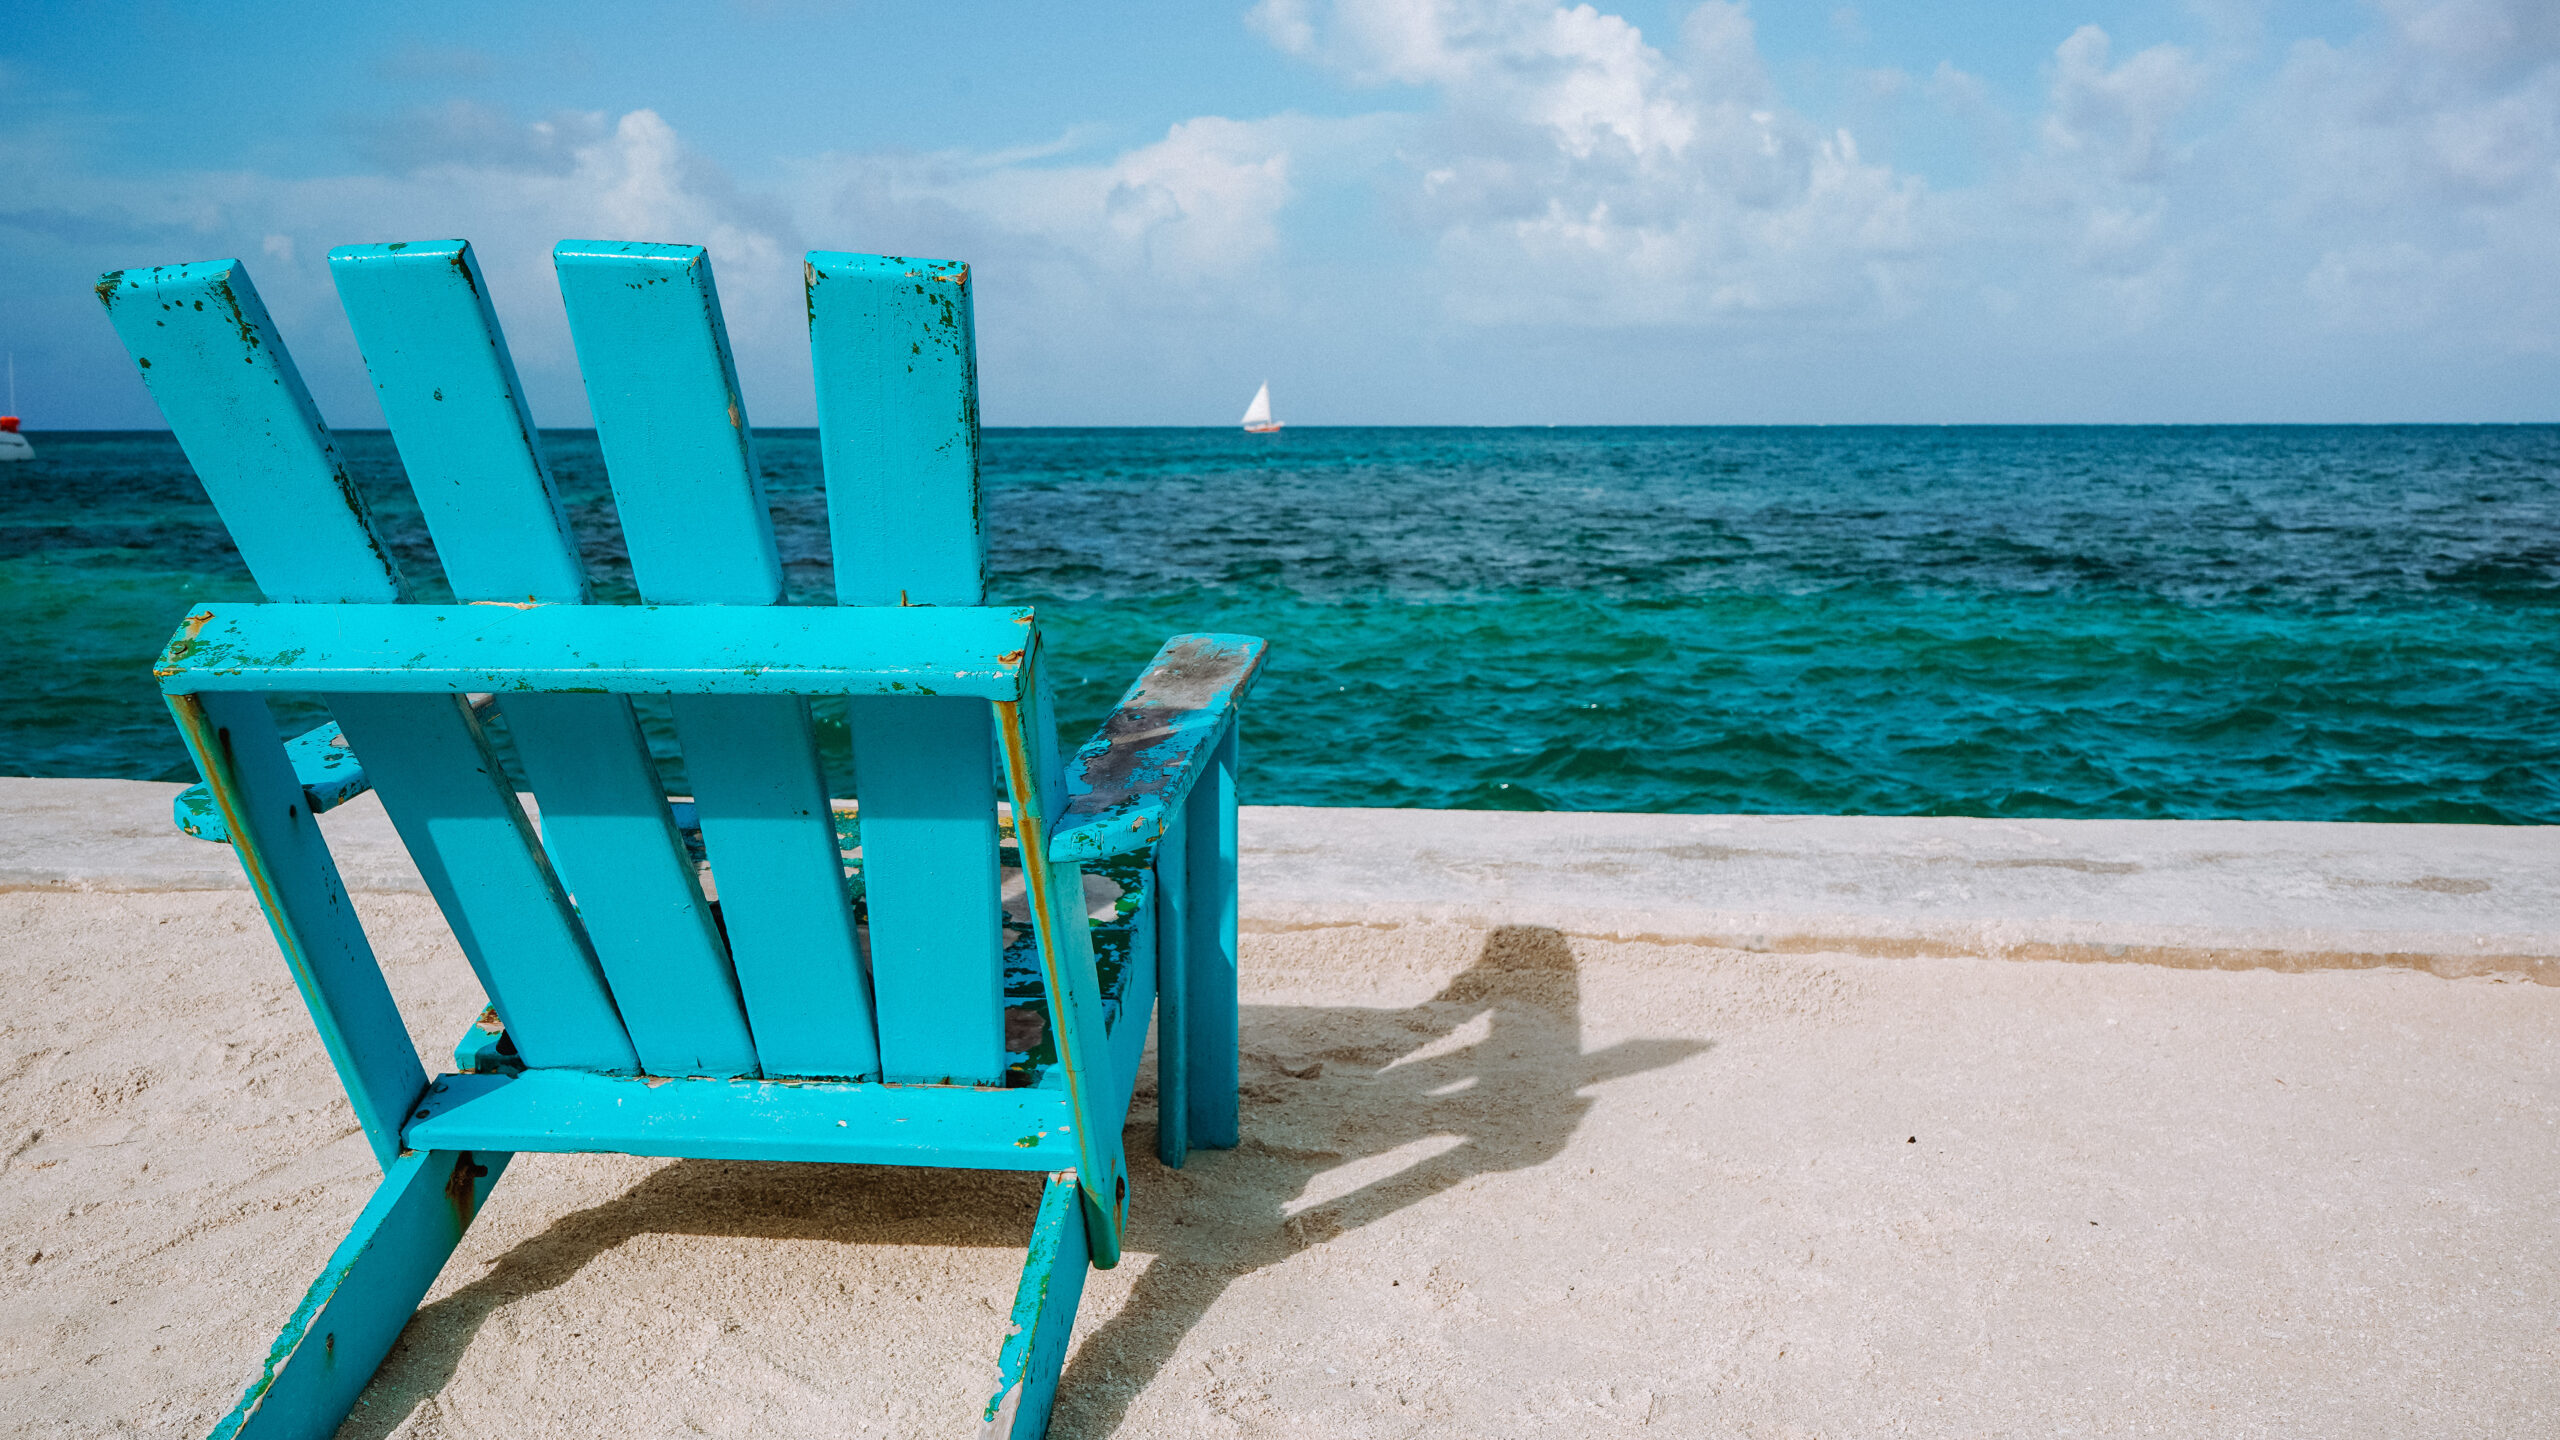 bright-turquoise-adirondack-chair-overlooking-deep-azure-turquoise-sea-with-sailboat-in-the-background